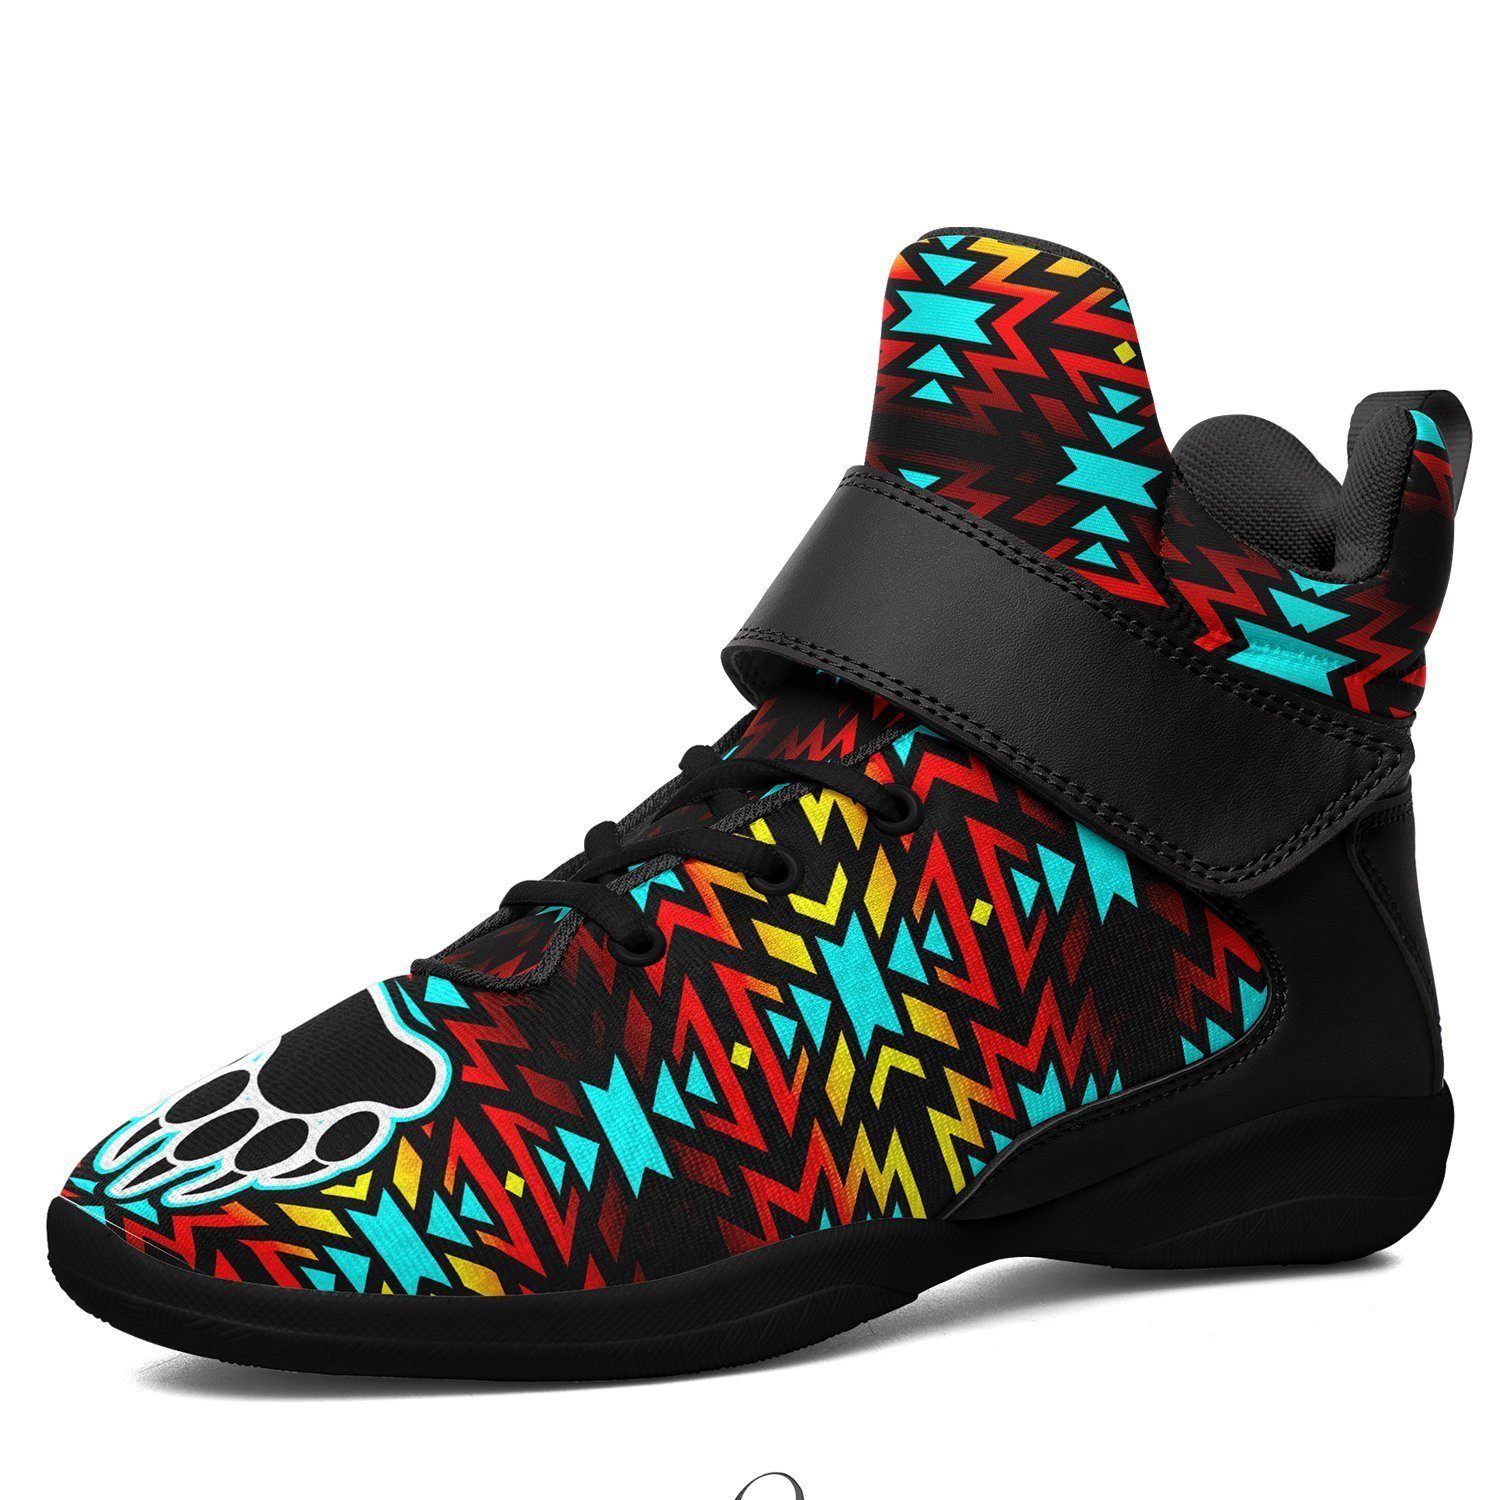 Fire Colors and Turquoise Bearpaw Ipottaa Basketball / Sport High Top Shoes - Black Sole 49 Dzine US Men 7 / EUR 40 Black Sole with Black Strap 